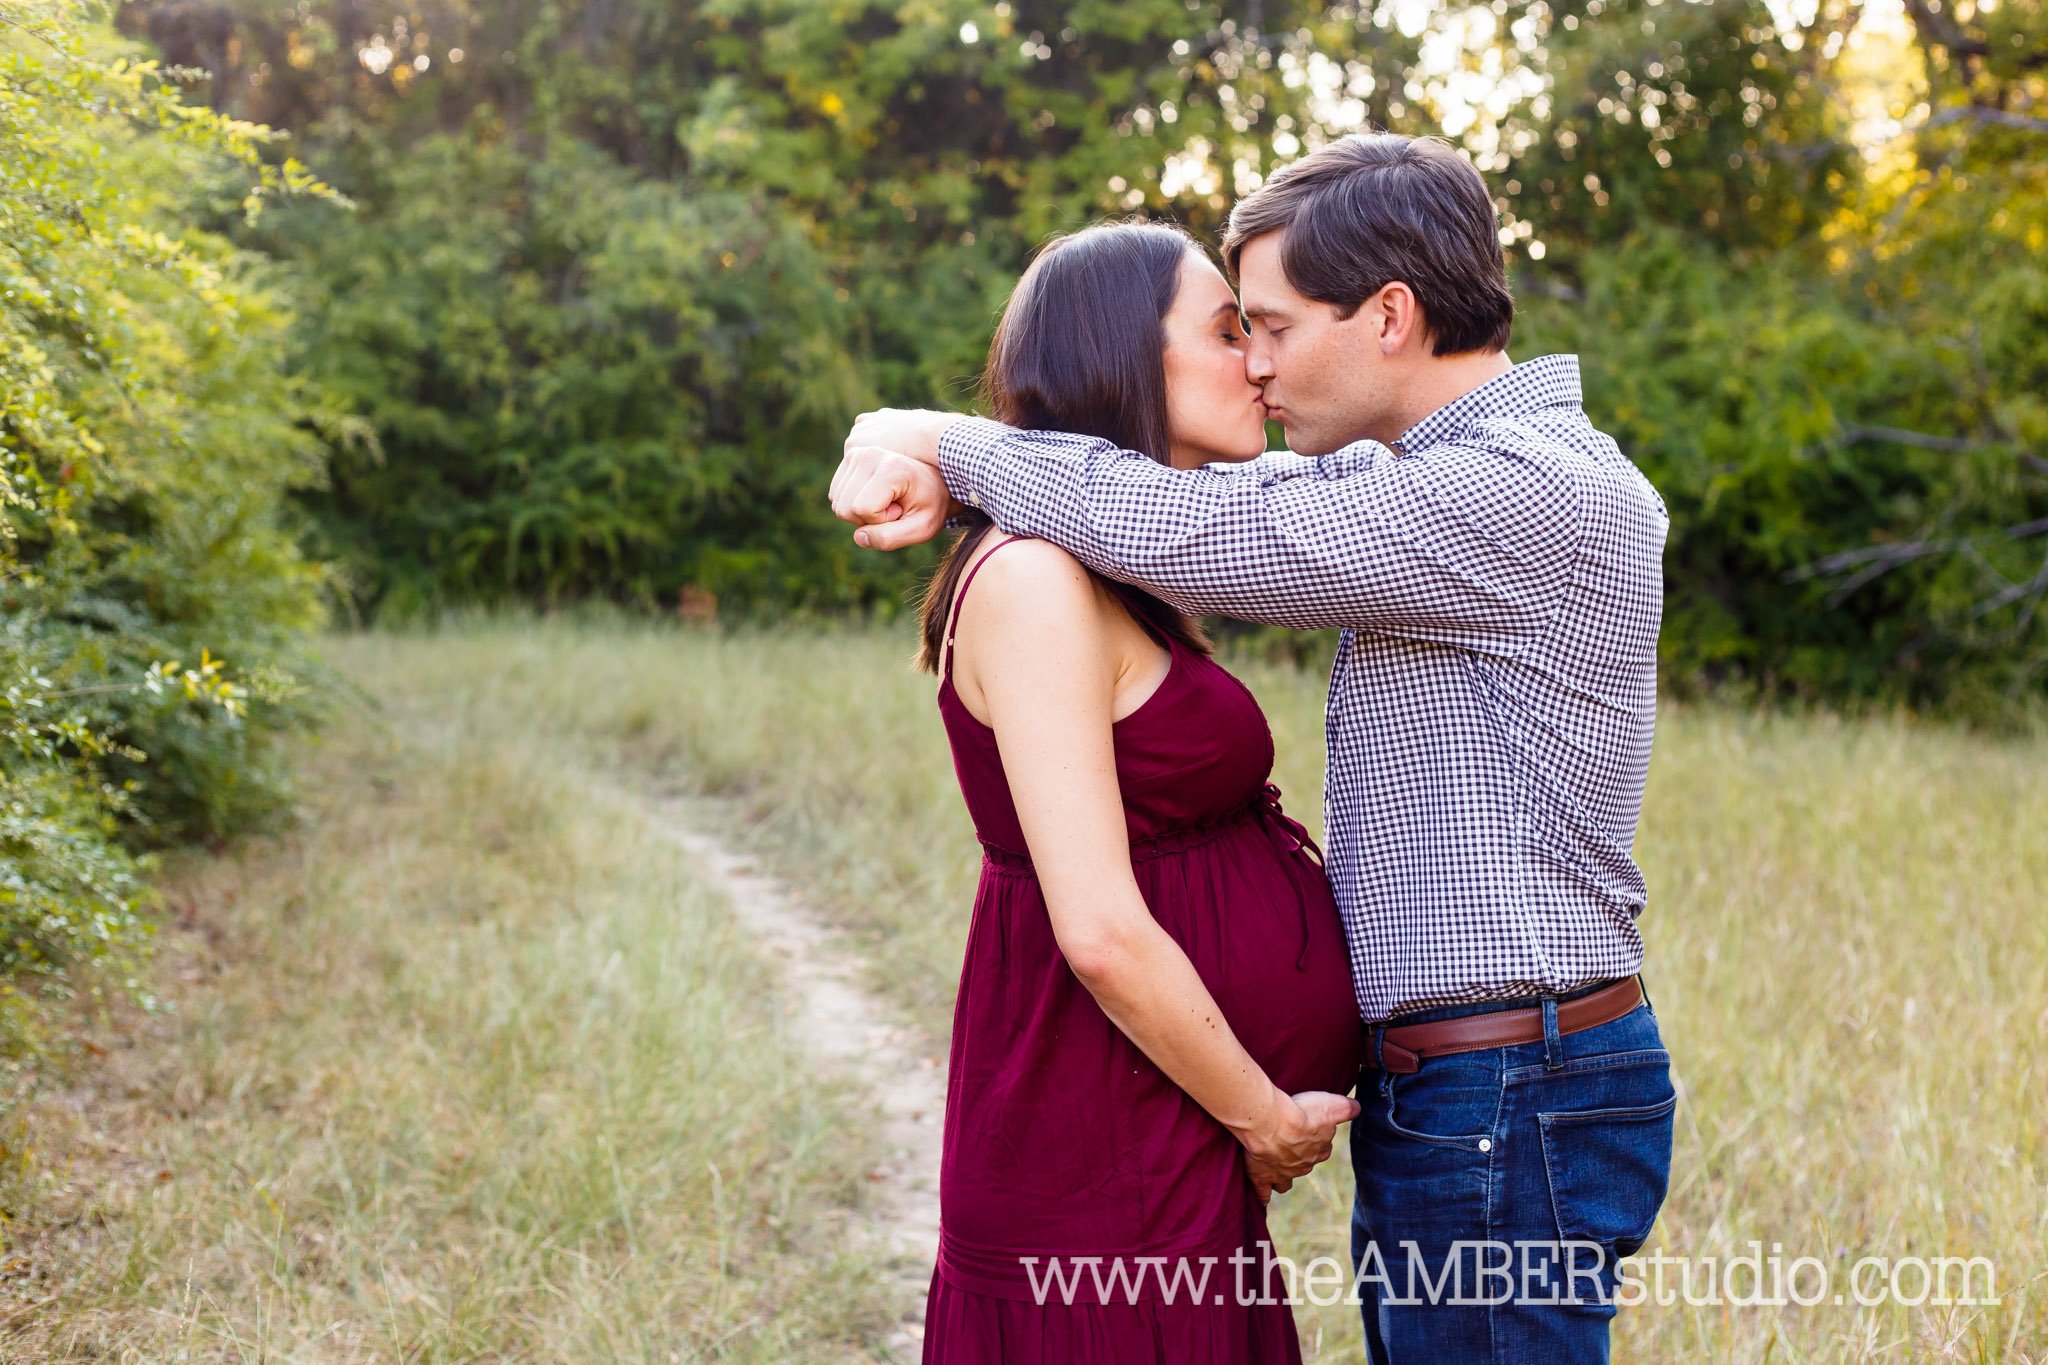 dallas-photographer-maternity-pregnant-preggers-baby-couple-married-white-rock-lake-dfw-texas-black-african-american-fall-burgundydress-jeans0008